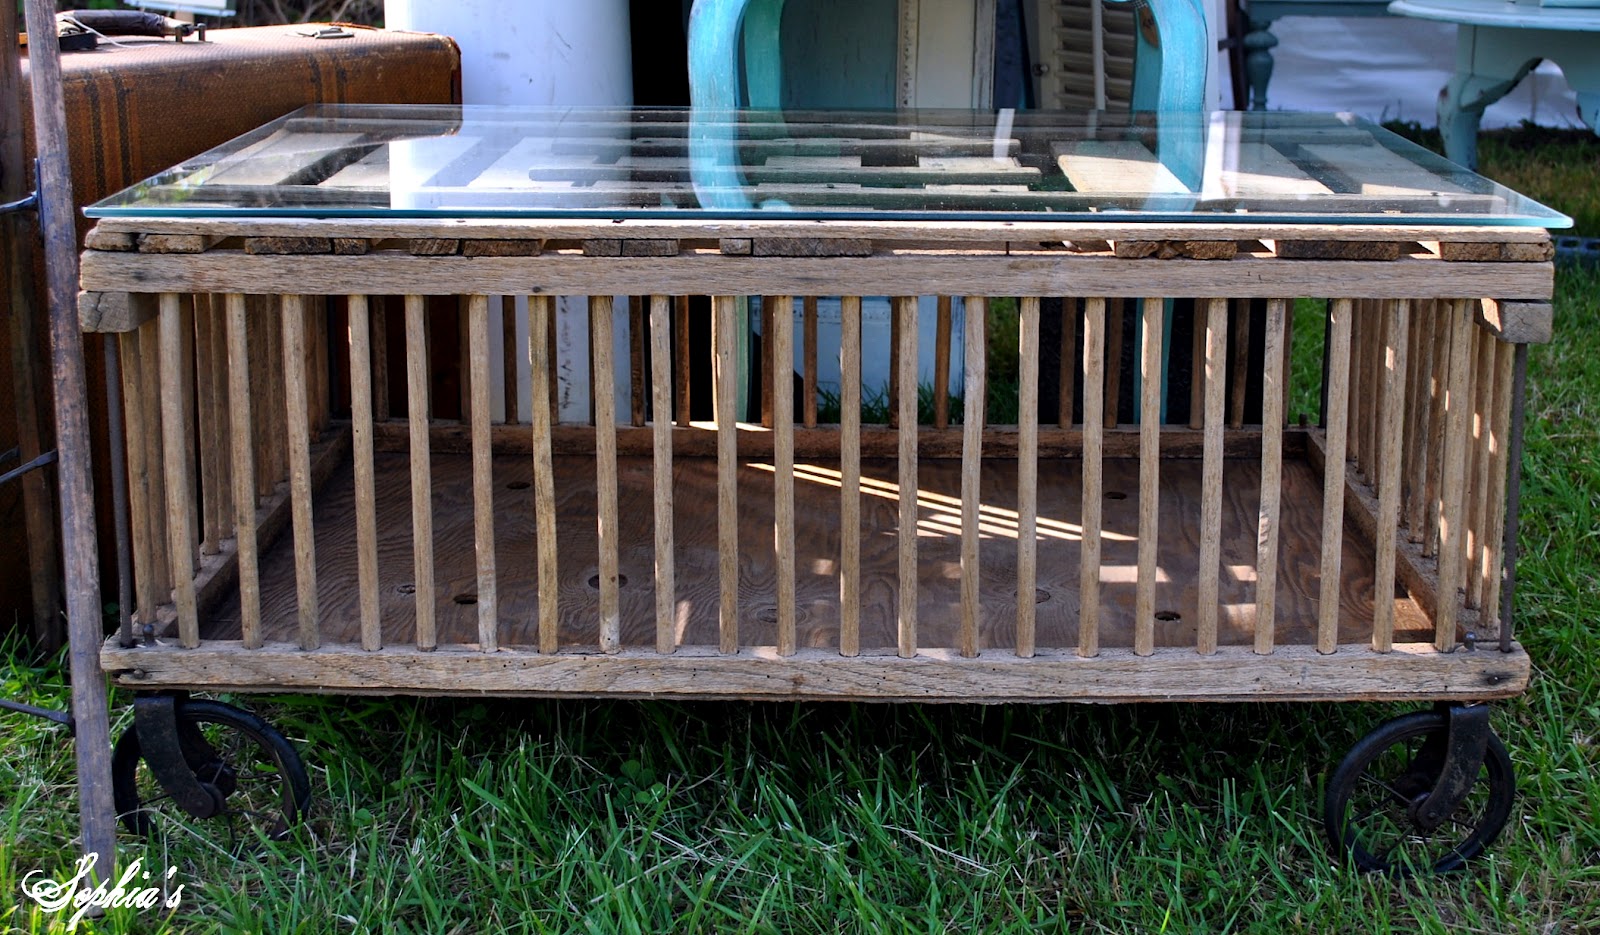 Chicken Crate Coffee Table